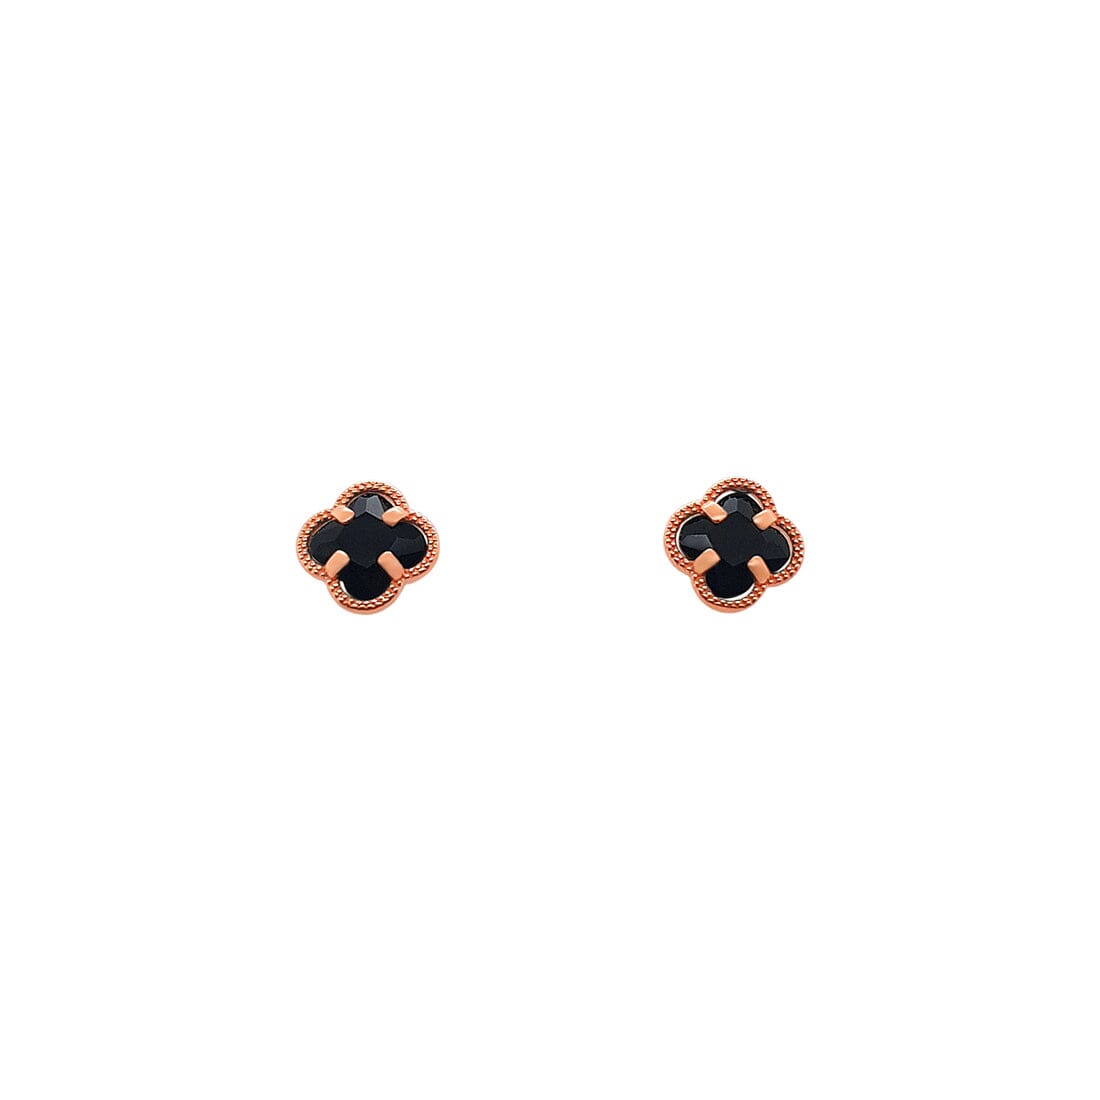 9ct Rose Gold Silver Infused 4 Leaf Clover Stud Earring with Black Crystal Earrings Bevilles 